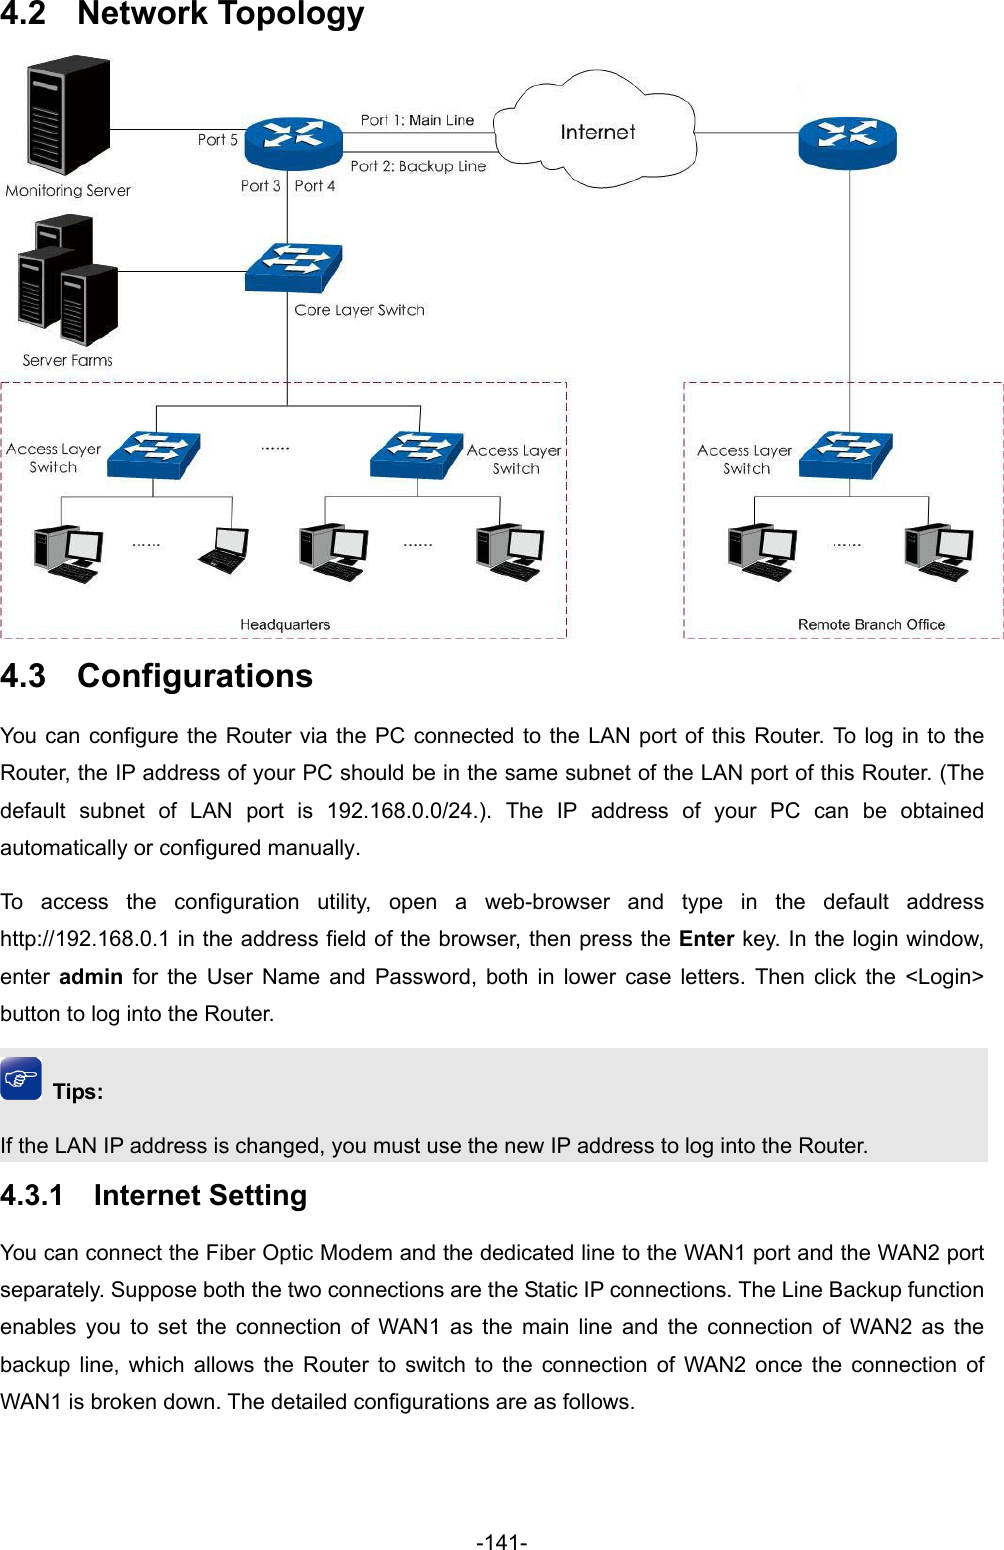  -141- 4.2  Network Topology  4.3  Configurations You can configure the Router via the PC connected to the LAN port of this Router. To log in to the Router, the IP address of your PC should be in the same subnet of the LAN port of this Router. (The default subnet of LAN port is 192.168.0.0/24.). The IP address of your PC can be obtained automatically or configured manually.   To access the configuration utility, open a web-browser and type in the default address http://192.168.0.1 in the address field of the browser, then press the Enter key. In the login window, enter  admin for the User Name and Password, both in lower case letters. Then click the &lt;Login&gt; button to log into the Router.  Tips: If the LAN IP address is changed, you must use the new IP address to log into the Router. 4.3.1  Internet Setting You can connect the Fiber Optic Modem and the dedicated line to the WAN1 port and the WAN2 port separately. Suppose both the two connections are the Static IP connections. The Line Backup function enables you to set the connection of WAN1 as the main line and the connection of WAN2 as the backup line, which allows the Router to switch to the connection of WAN2 once the connection of WAN1 is broken down. The detailed configurations are as follows. 